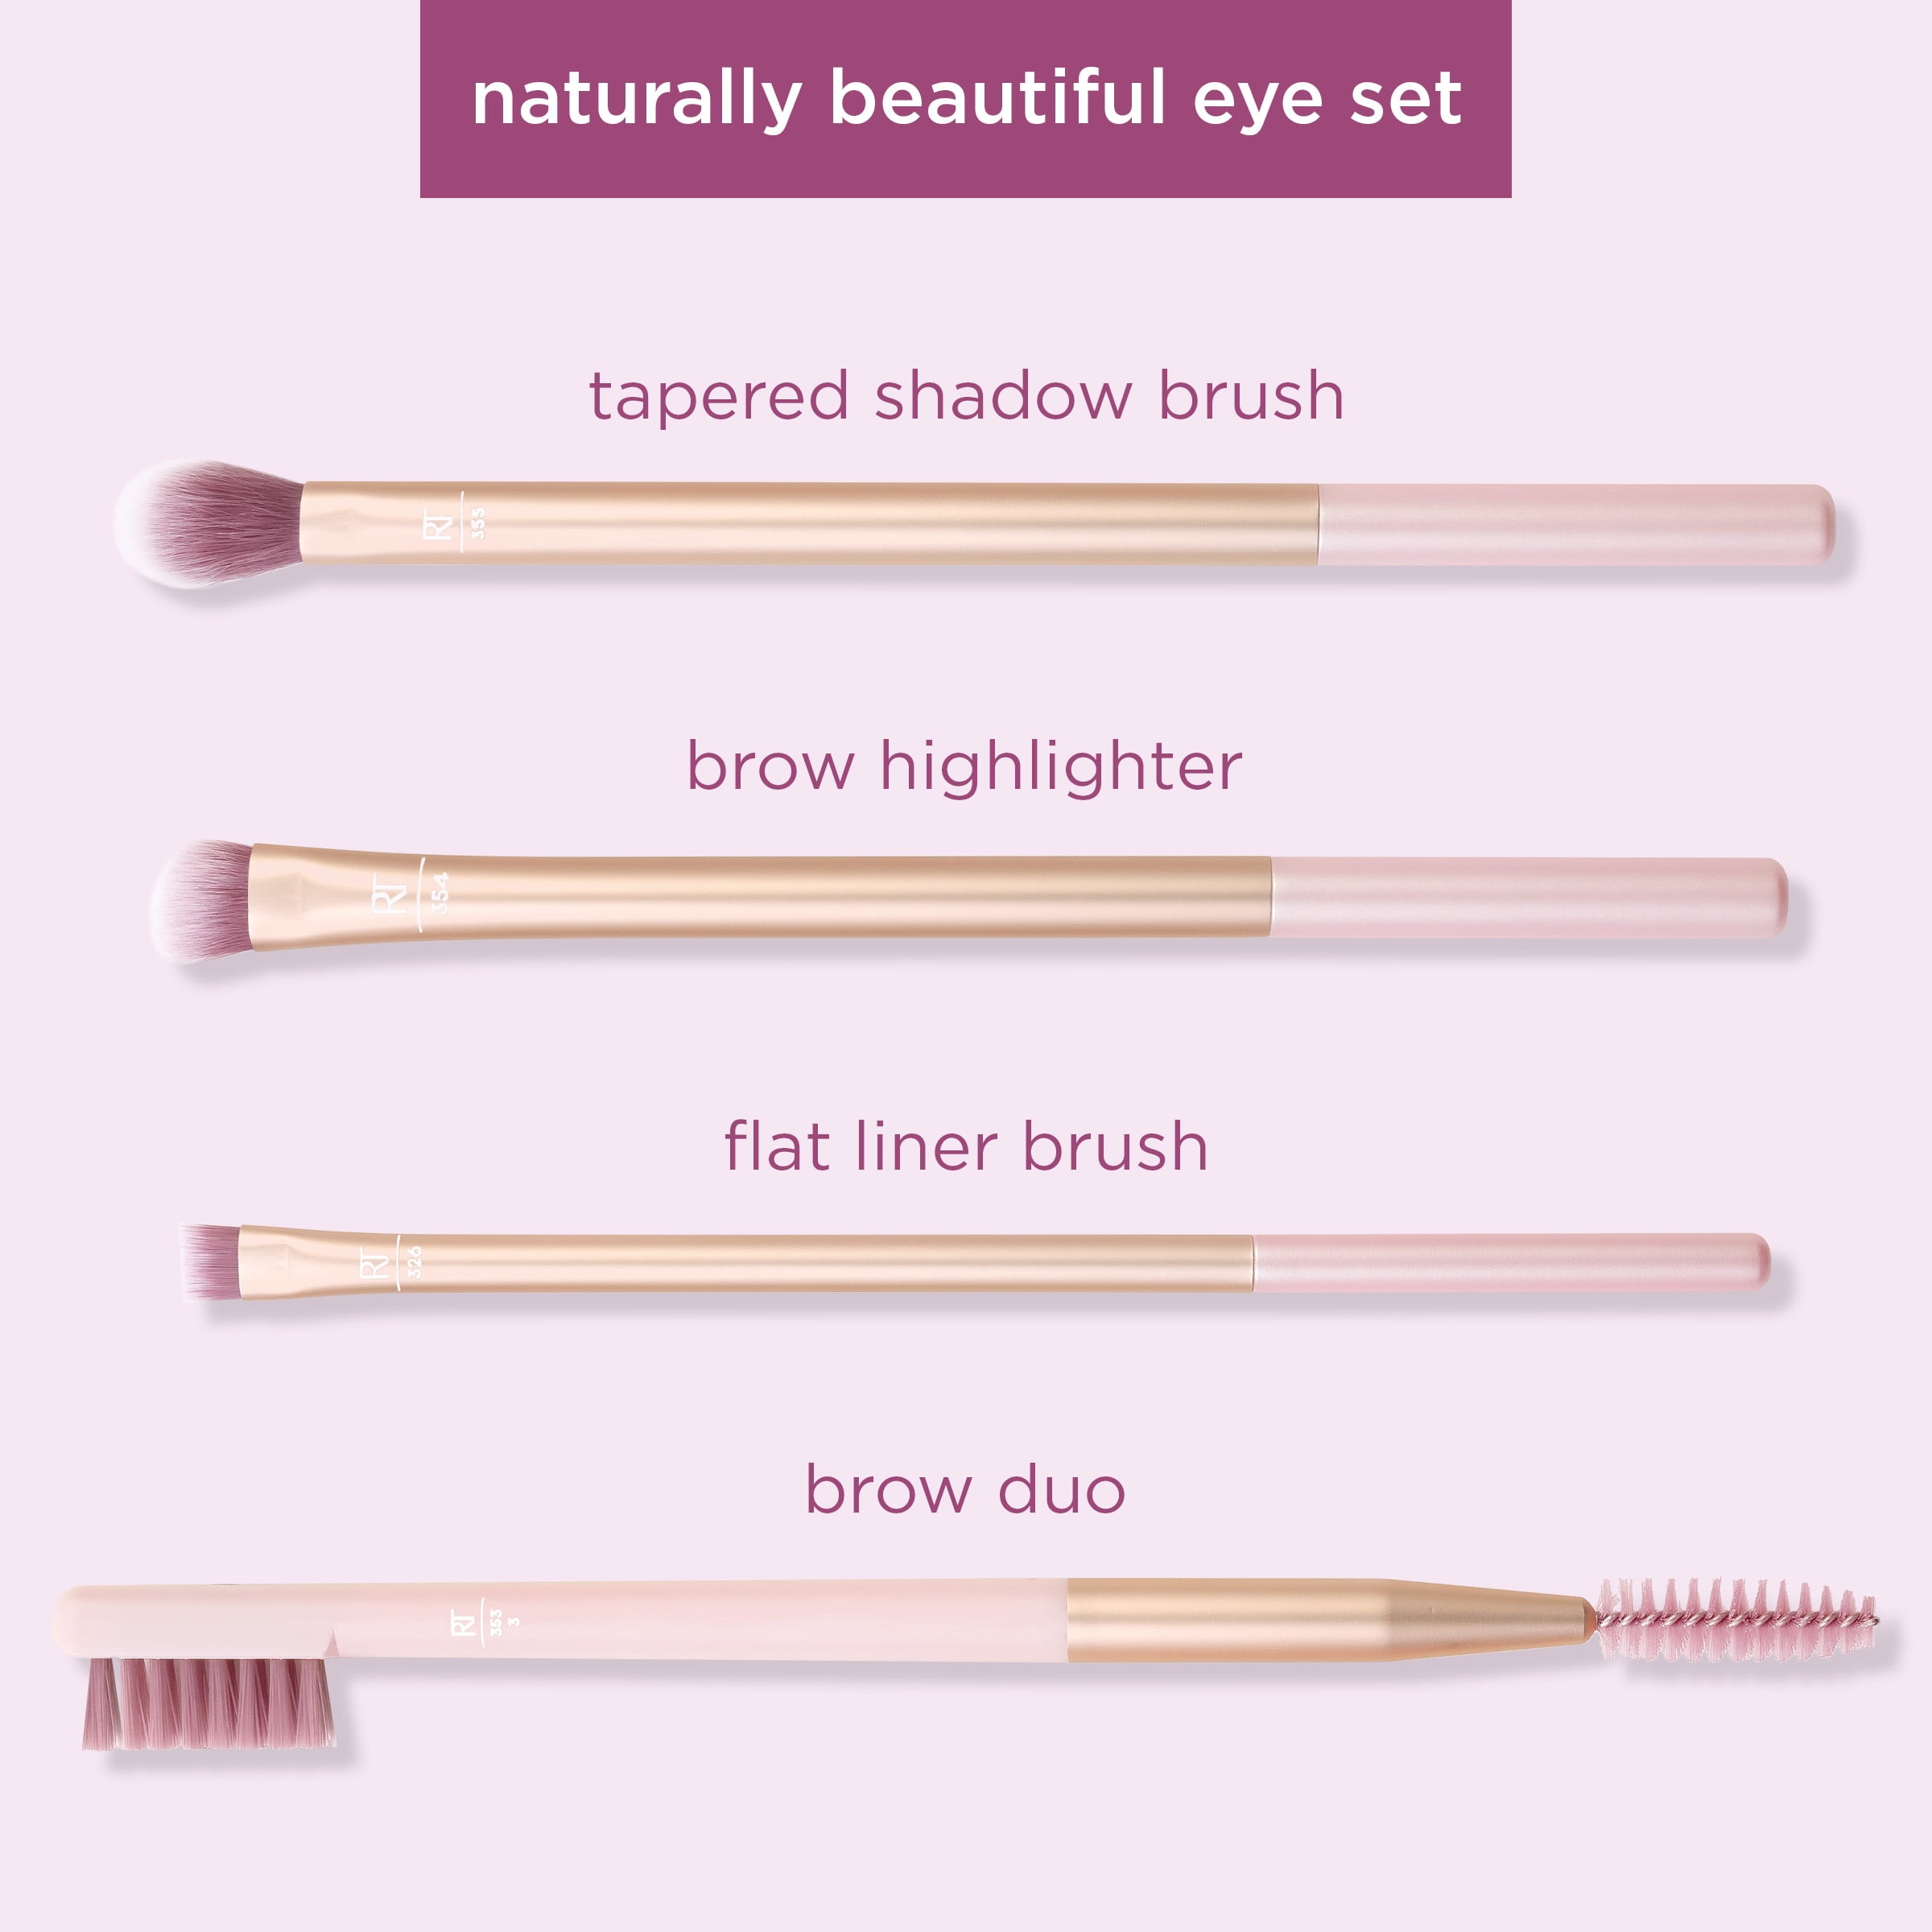 Real Techniques Naturally Beautiful Eye Set Pennelli make-up donna Set